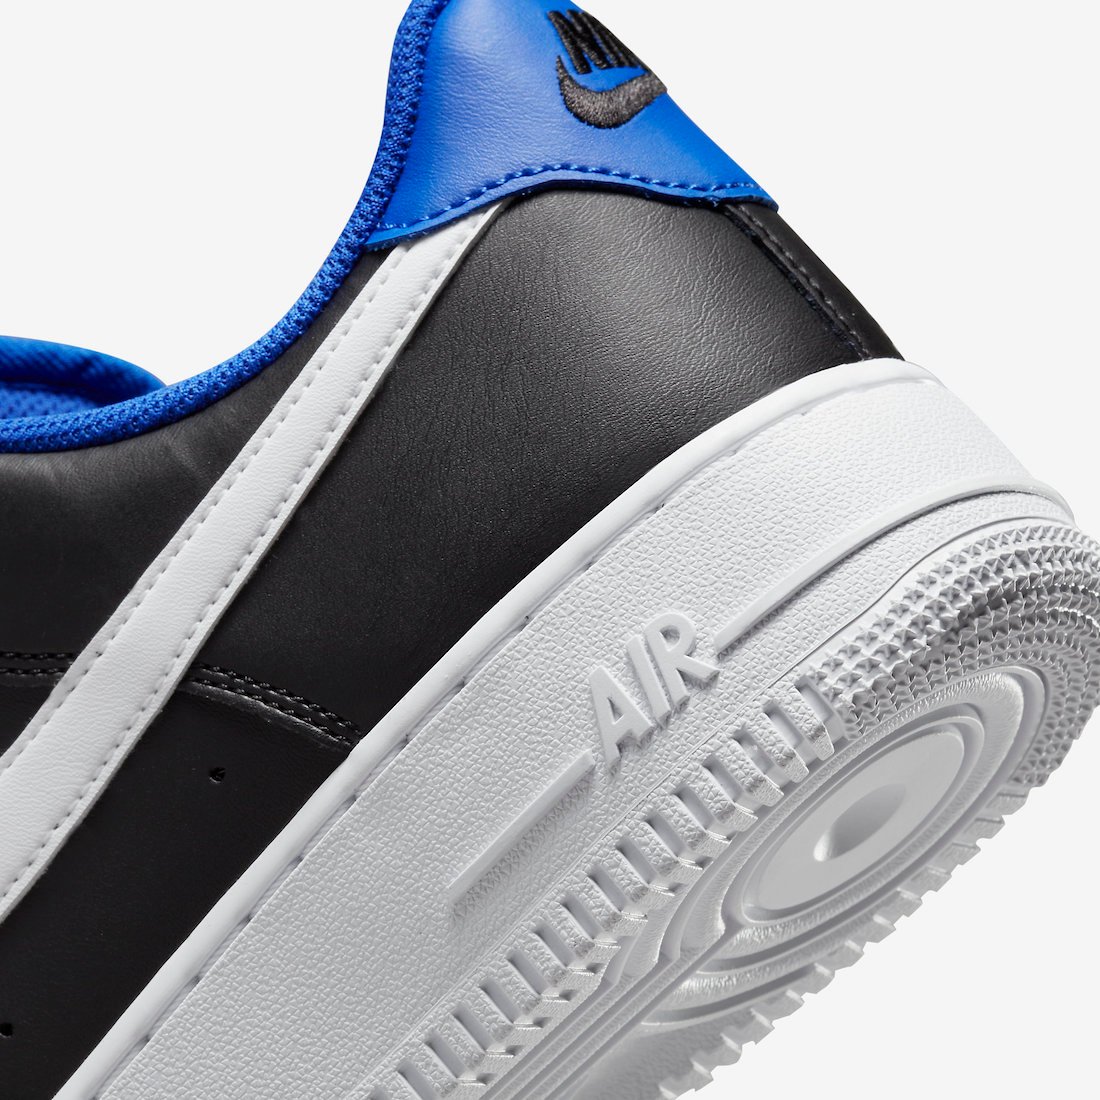 Nike Air Force 1 Low Shroud Black Blue White DC8875-001 Release Date Info